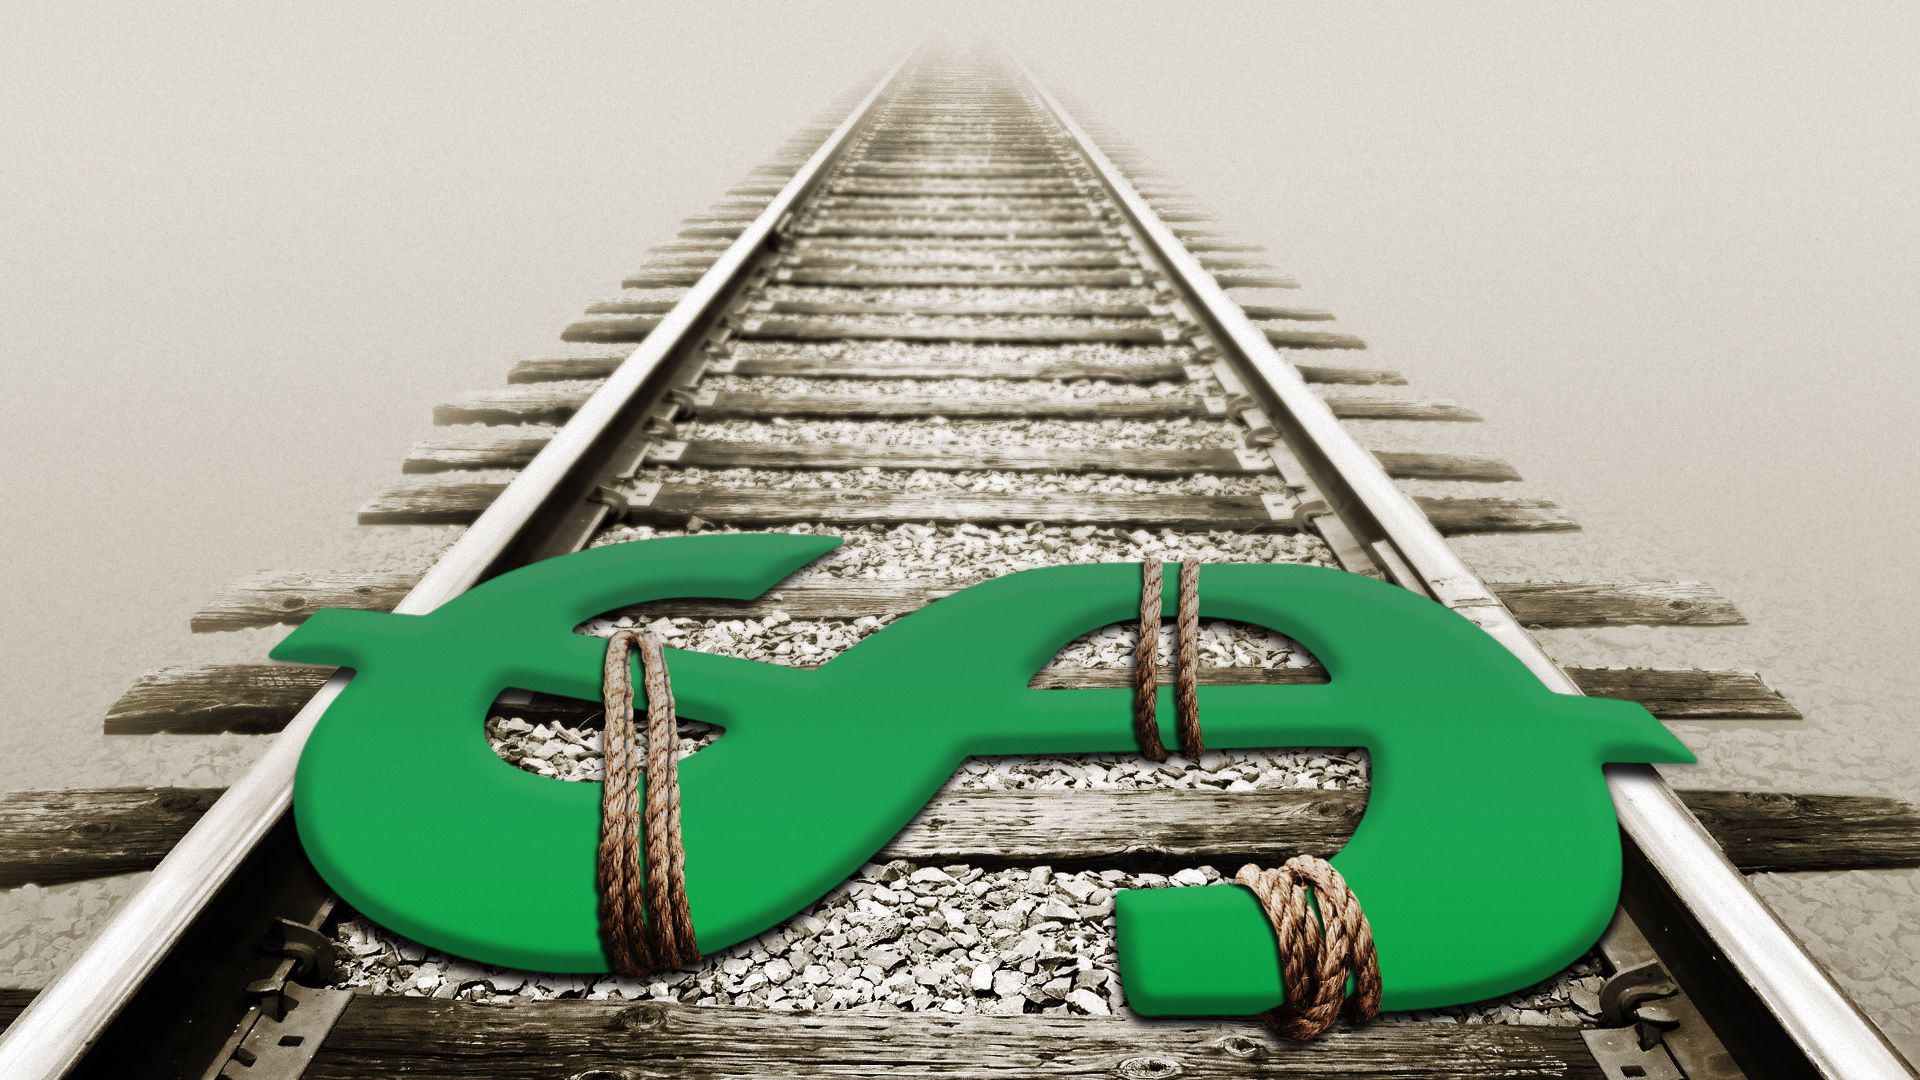 Illustration of a dollar sign tied with rope on train tracks.